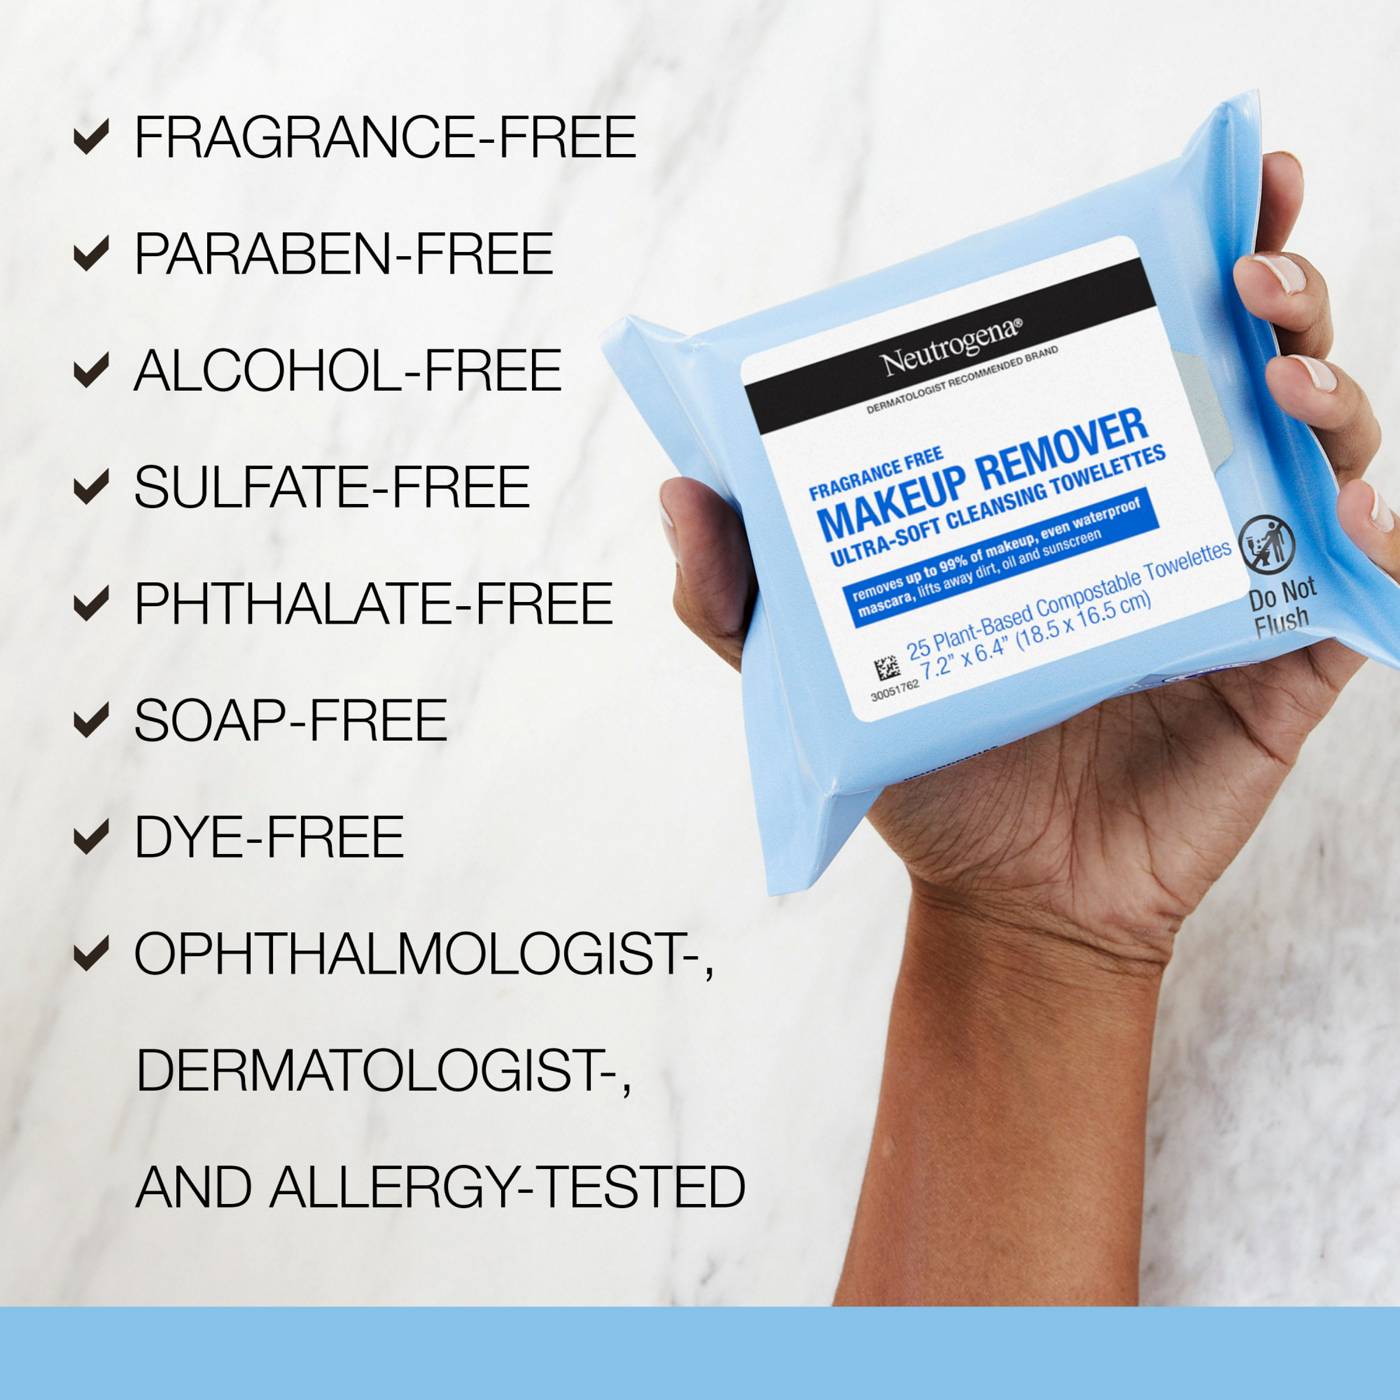 Neutrogena Makeup Remover Cleansing Towelettes - Fragrance Free; image 3 of 8